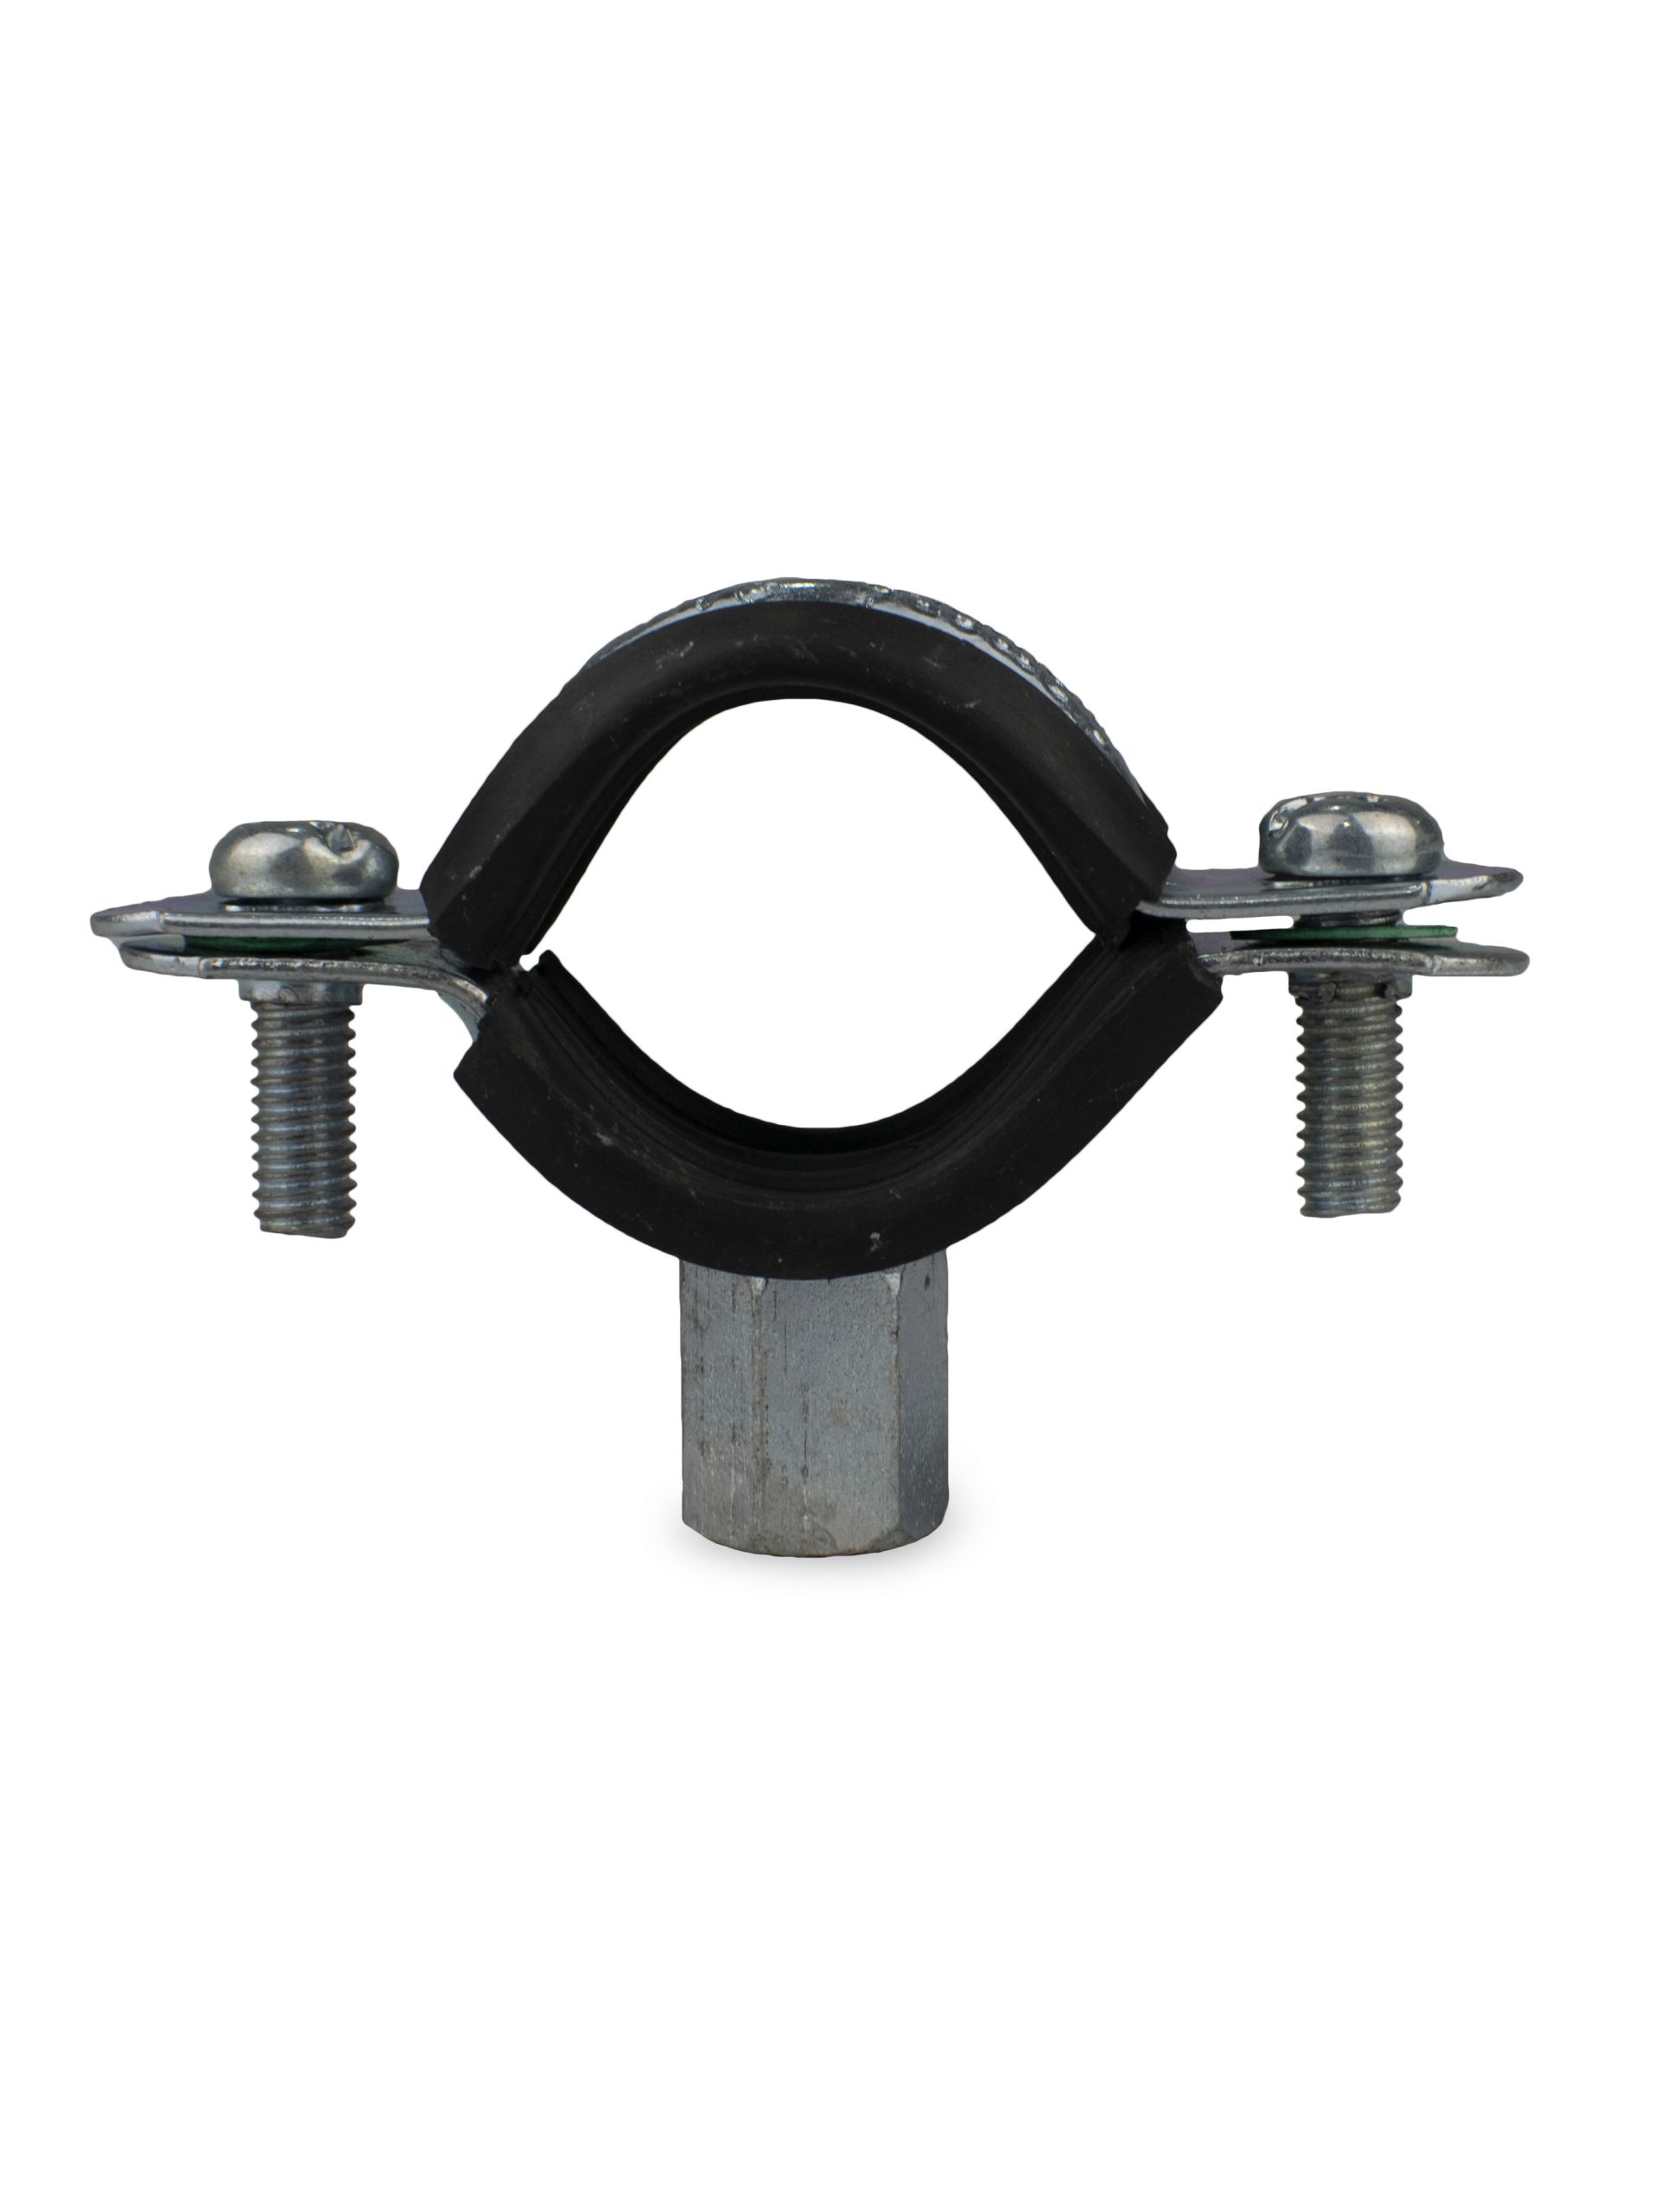 RUBBER LINED SPLIT CLAMP 3/4 Inches  , DIAMOND from Gas Equipment Company Llc Abu Dhabi, UNITED ARAB EMIRATES